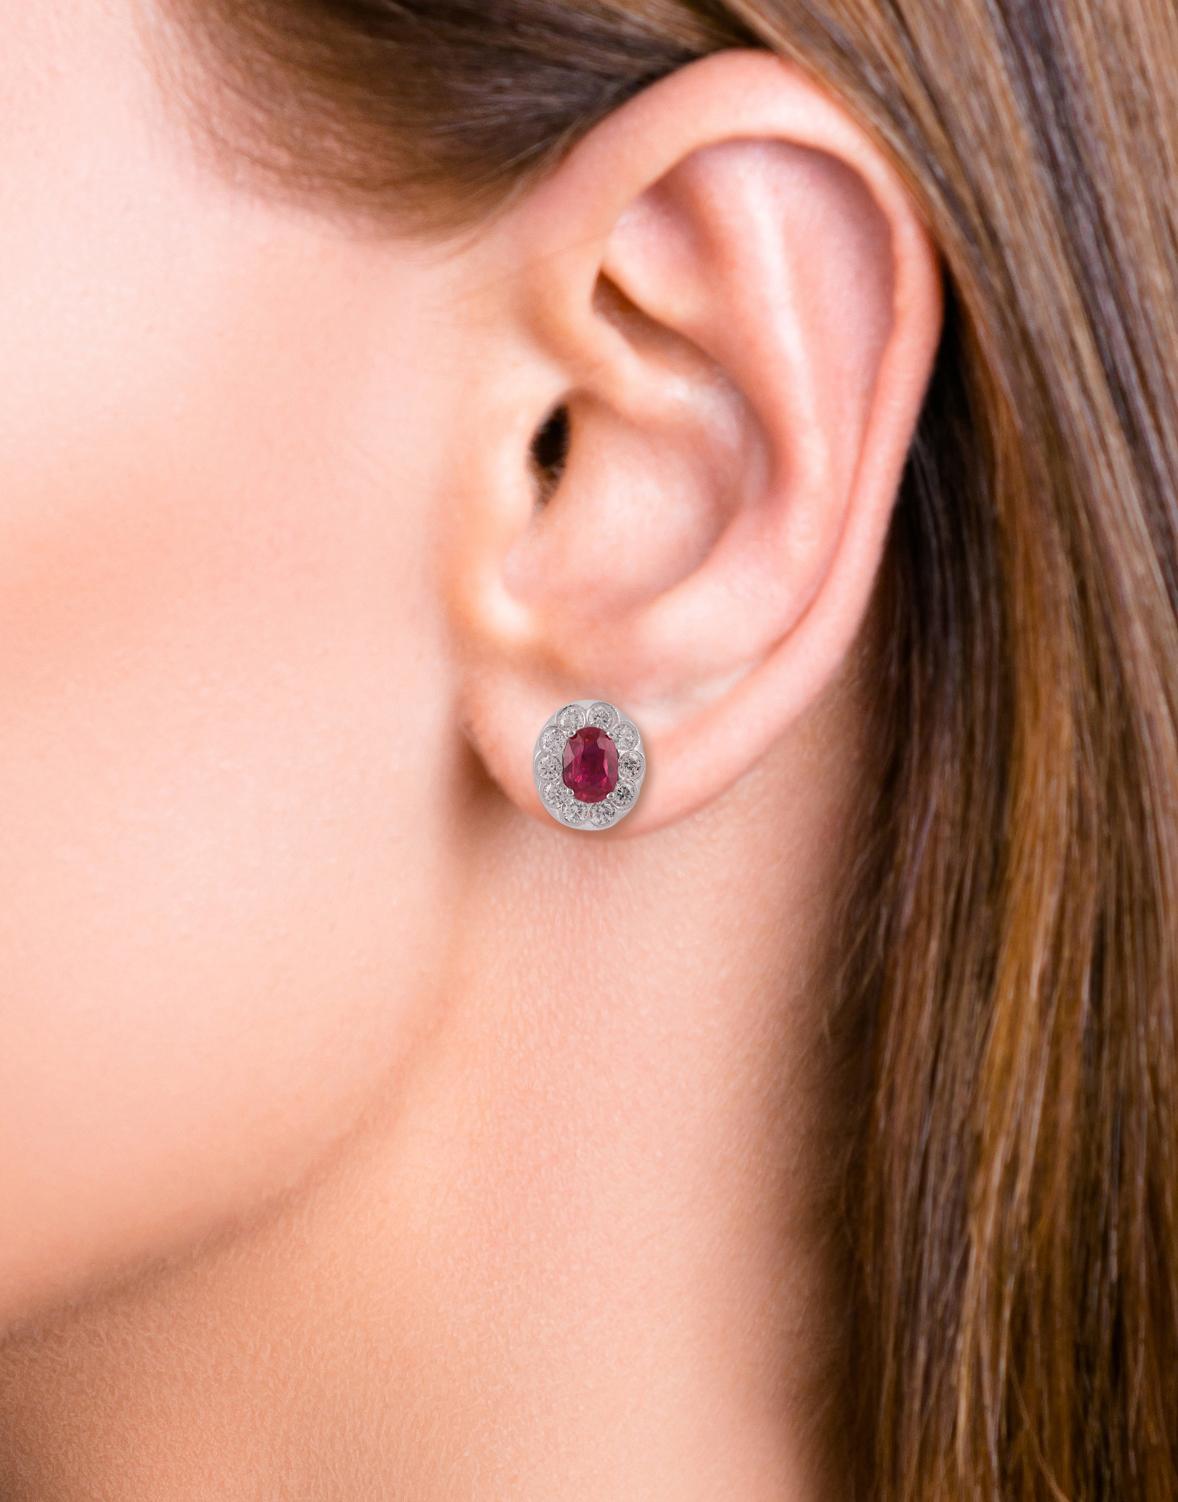 Oval Cut 2.12 Carat Natural Mozambique Ruby & Diamond Earrings Studs in 18k White Gold . For Sale